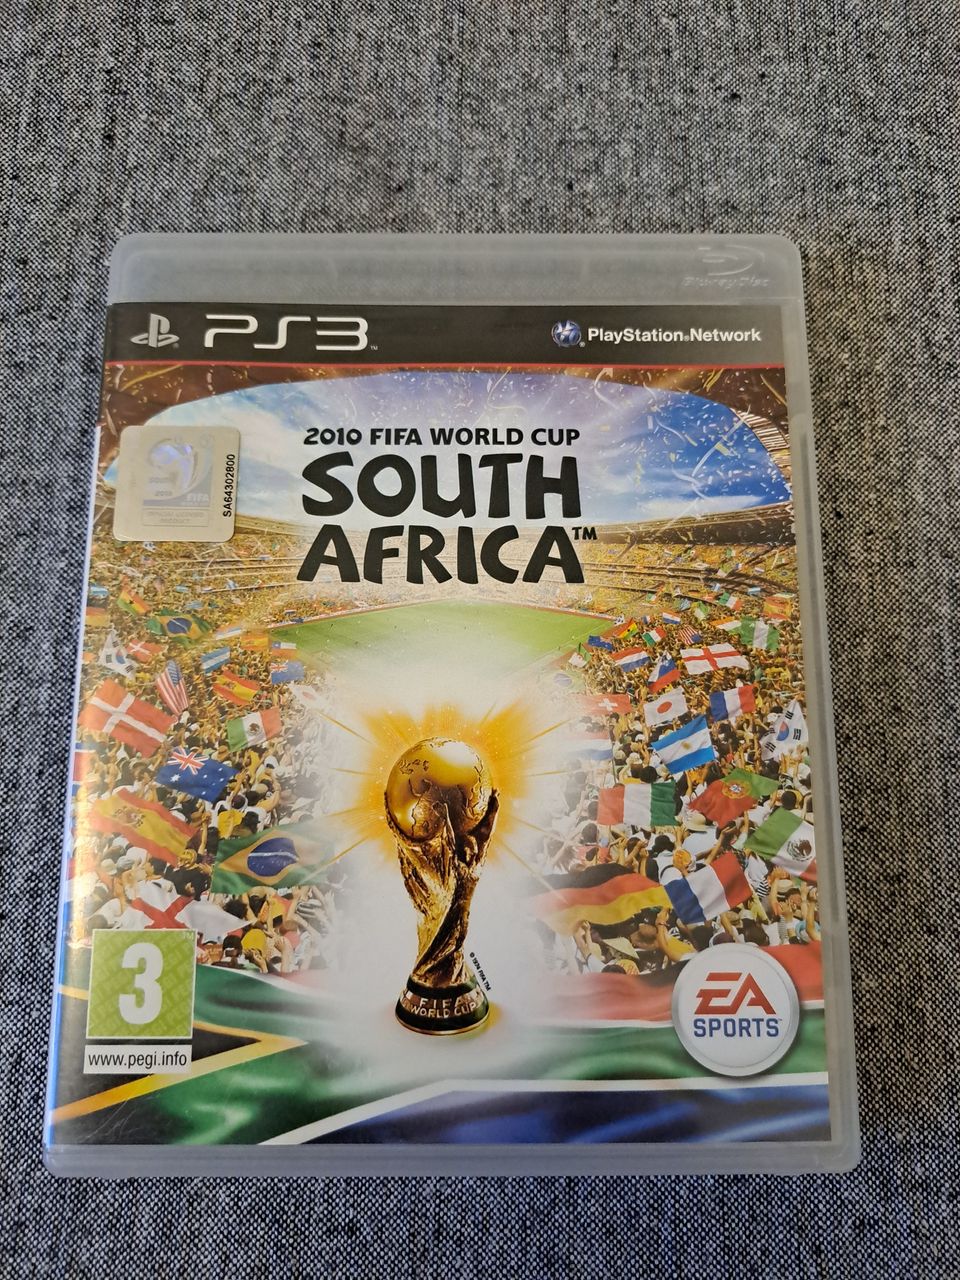 2010 Fifa world cup South Africa - PS3